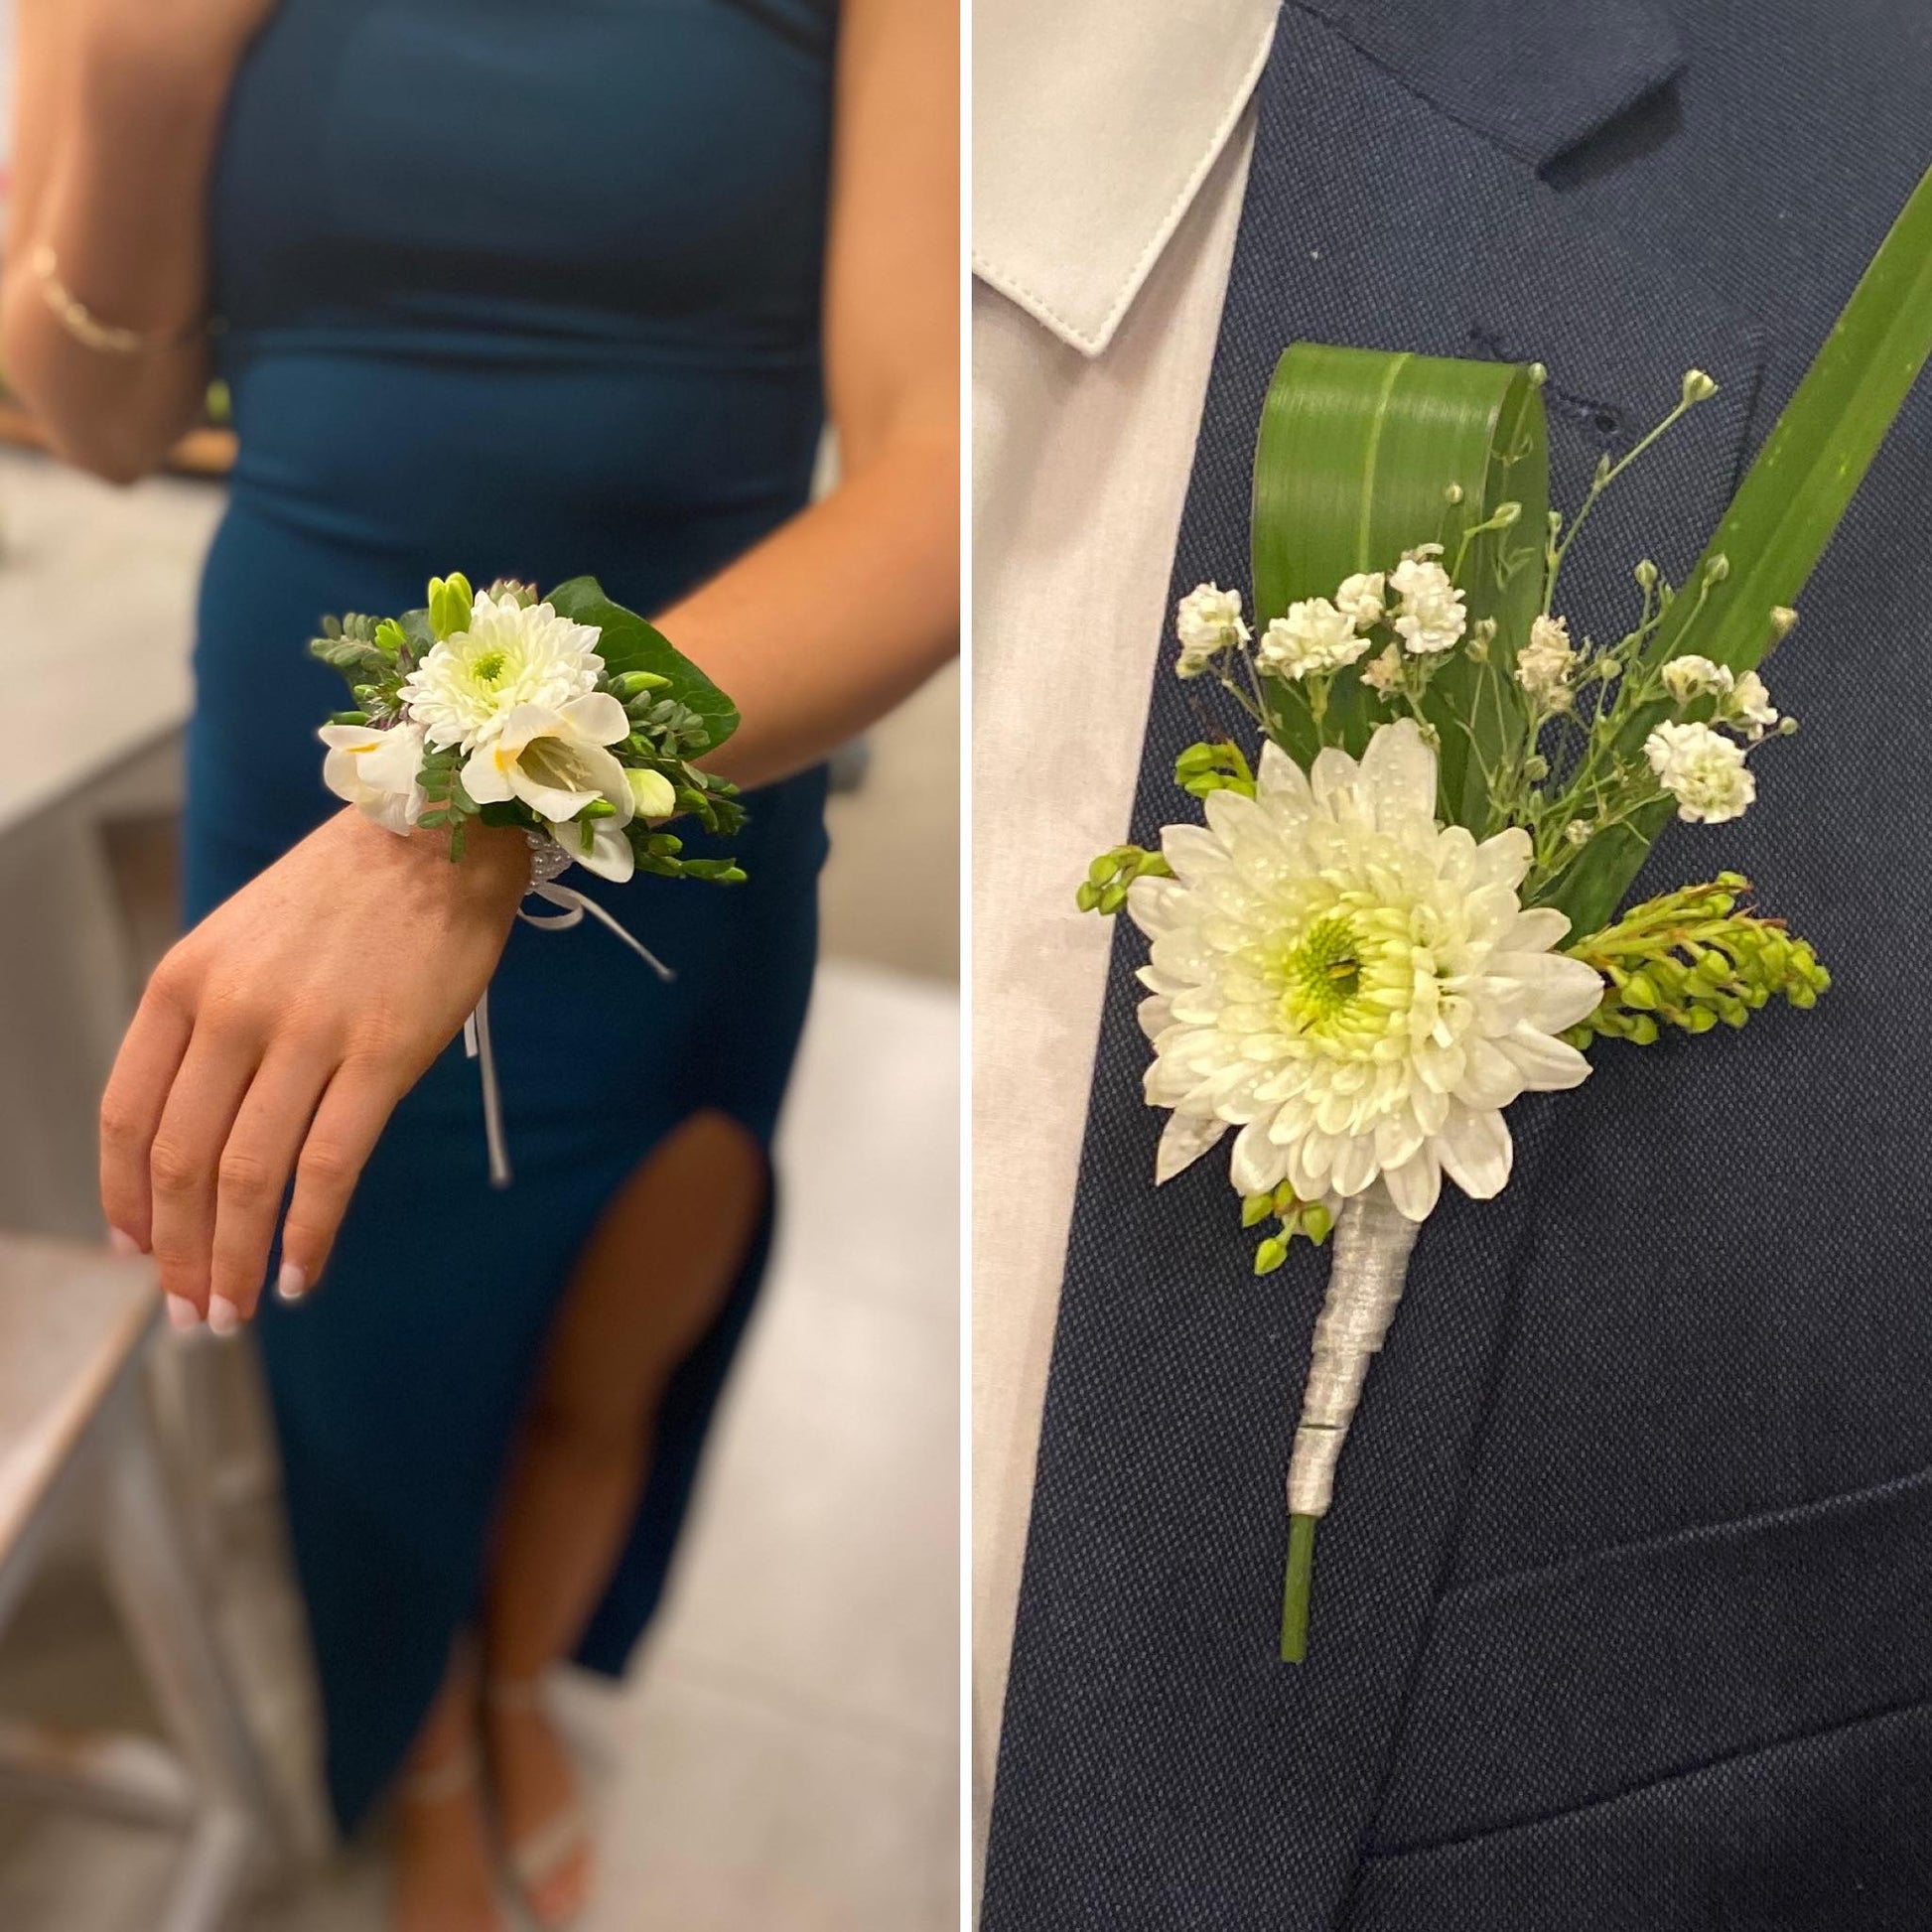 A gorgeous wrist corsage made with white flowers and interesting green foliage to complement any outfit. With a matching buttonhole to complete the look.